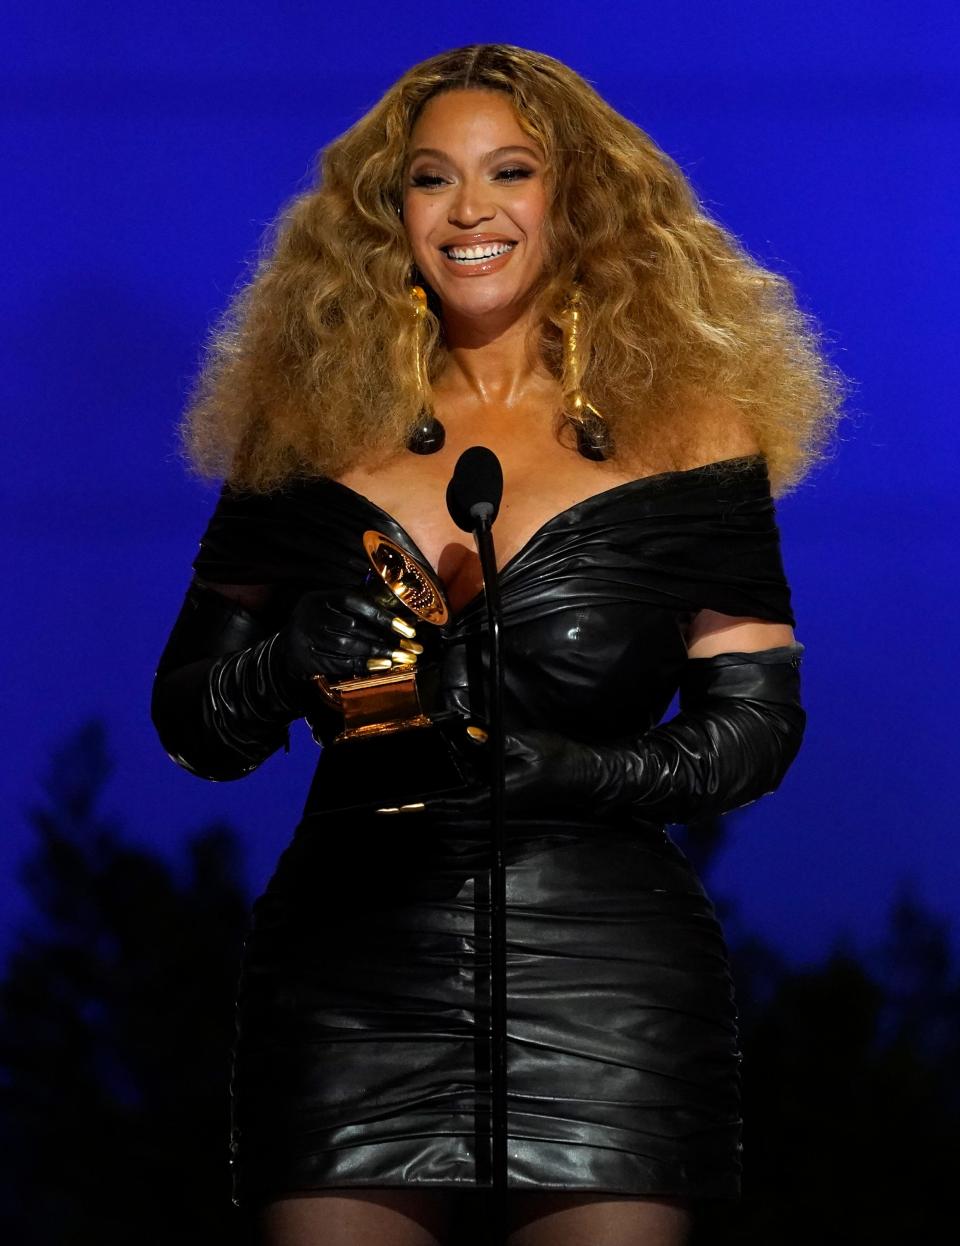 Beyonce accepts the award for best R&B performance for "Black Parade" at the 63rd annual Grammy Awards at the Los Angeles Convention Center on Sunday, March 14, 2021. (AP Photo/Chris Pizzello)